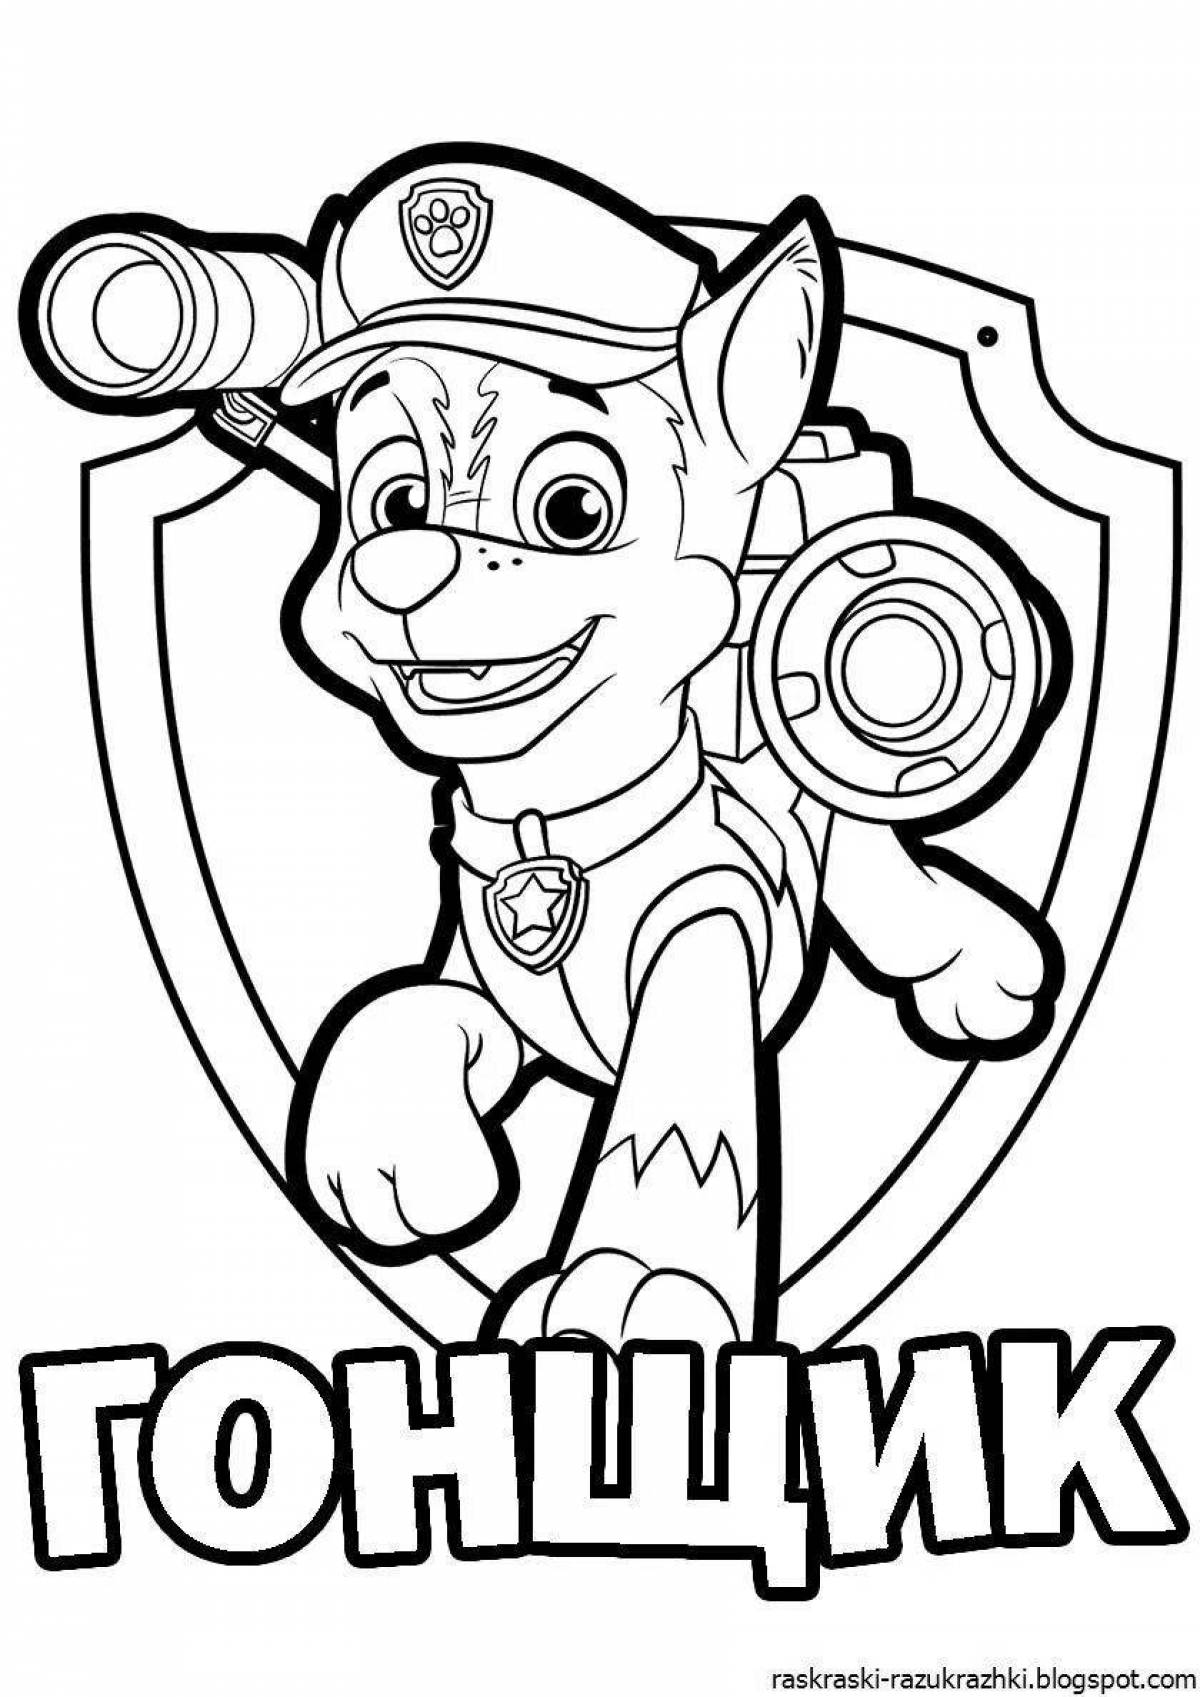 Paw Patrol playful coloring book for kids 3 4